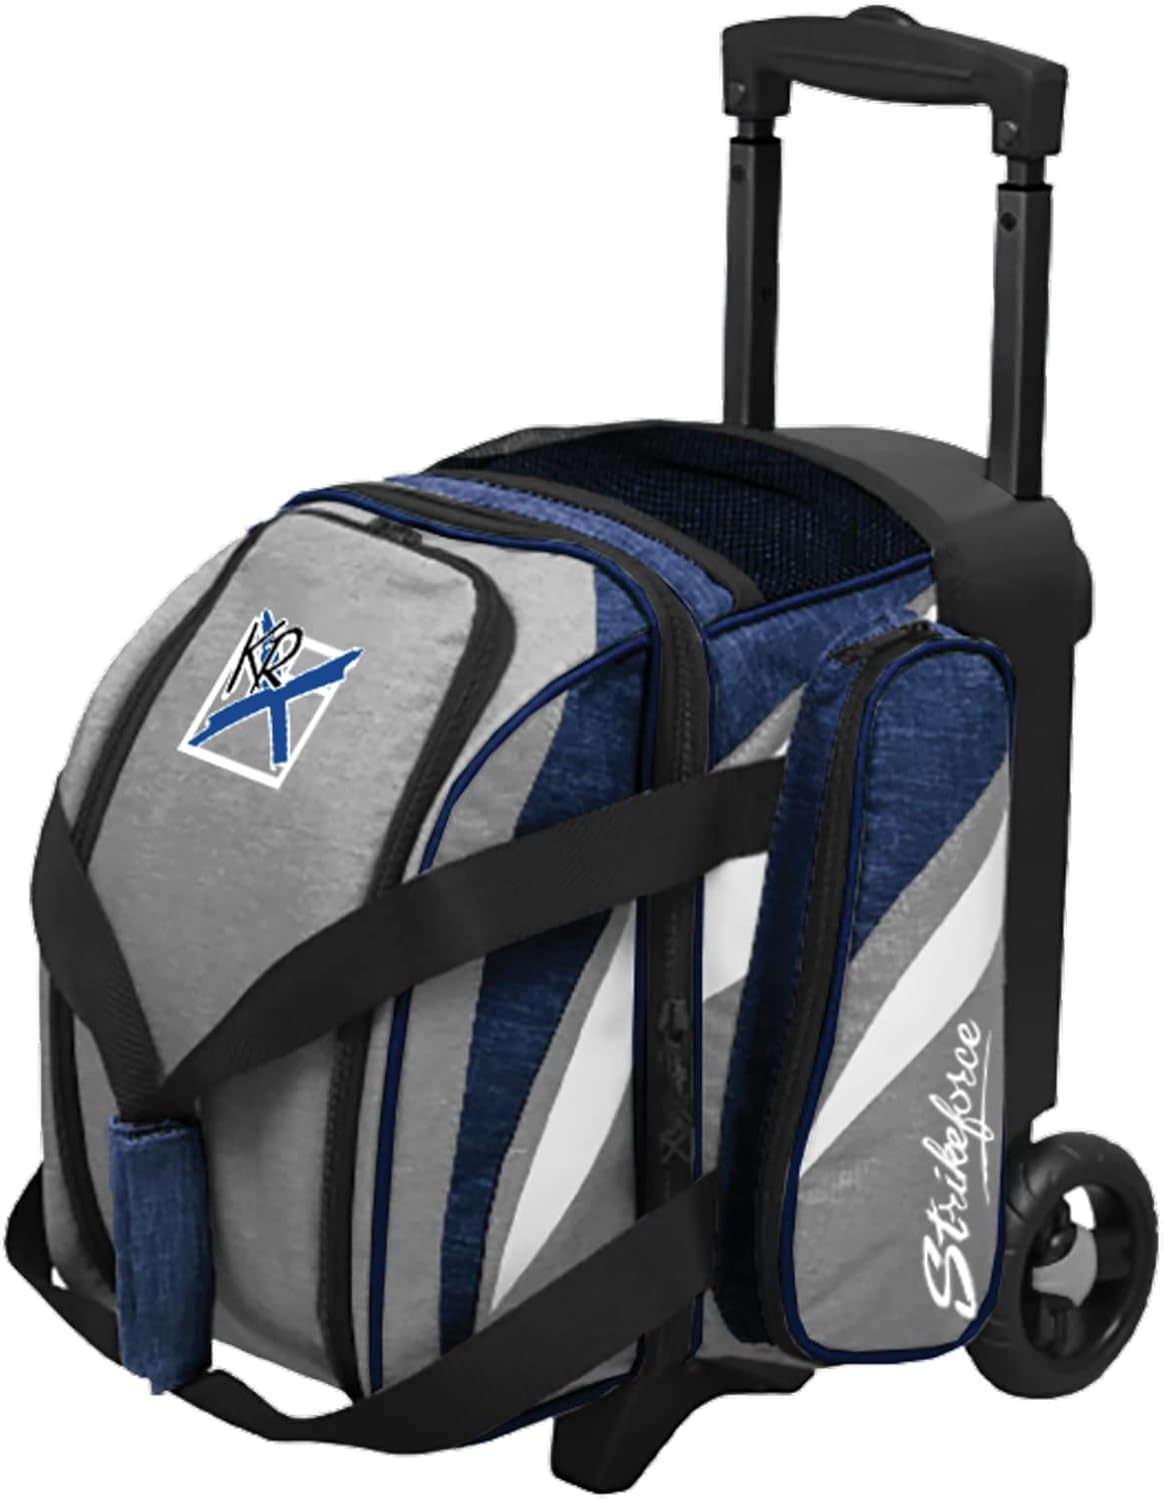 KR Strikeforce Cruiser Single Roller Bowling Bag with Top Shoe Compartment and Side Accessory Compartment